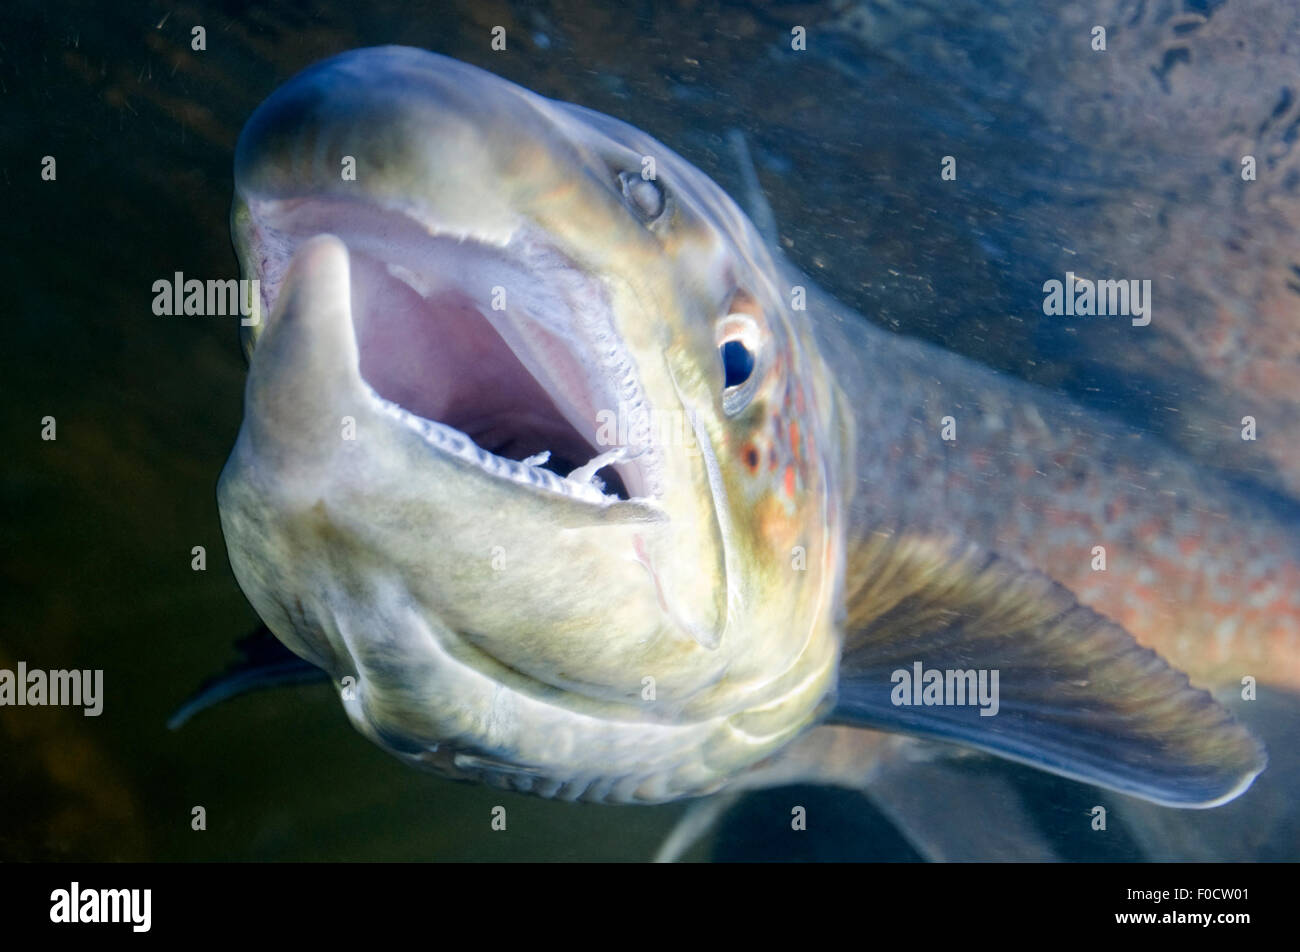 Atlantic salmon (Salmo salar) male with kype on bottom jaw showing, River  Orkla, Norway, September 2008 Stock Photo - Alamy